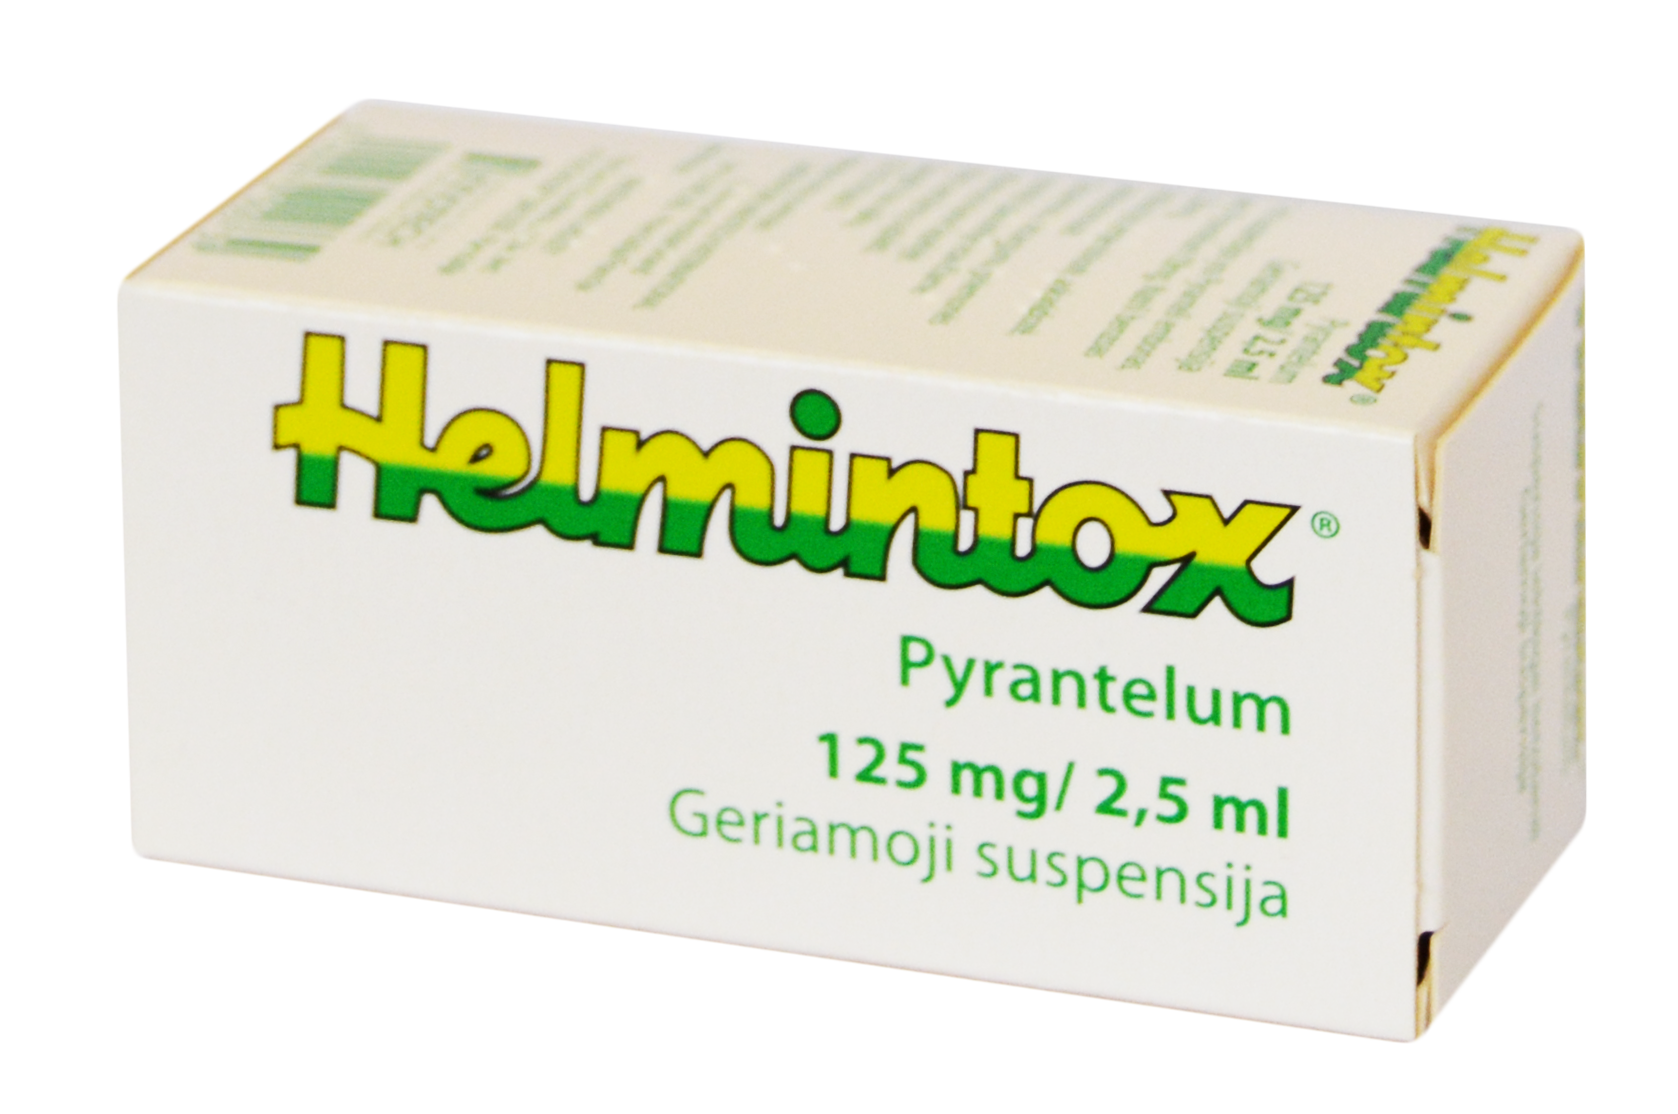 helmintox is used for